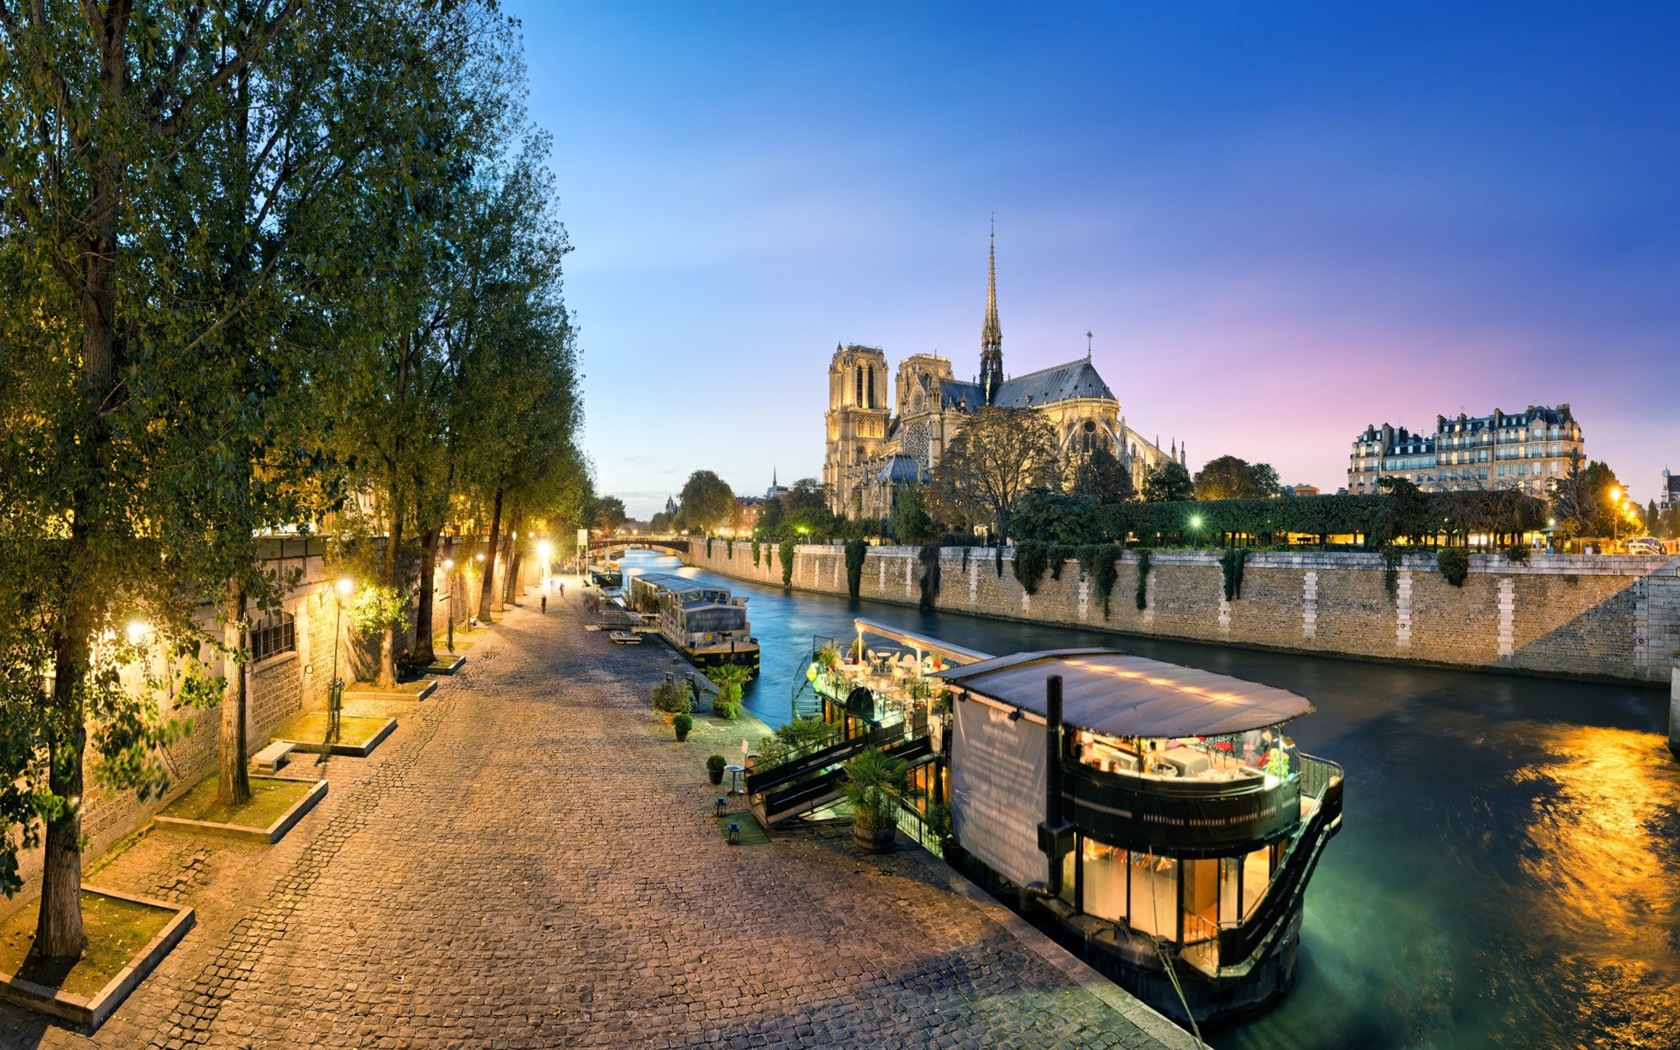 Notre Dame HD Wallpapers #3 - 1680x1050